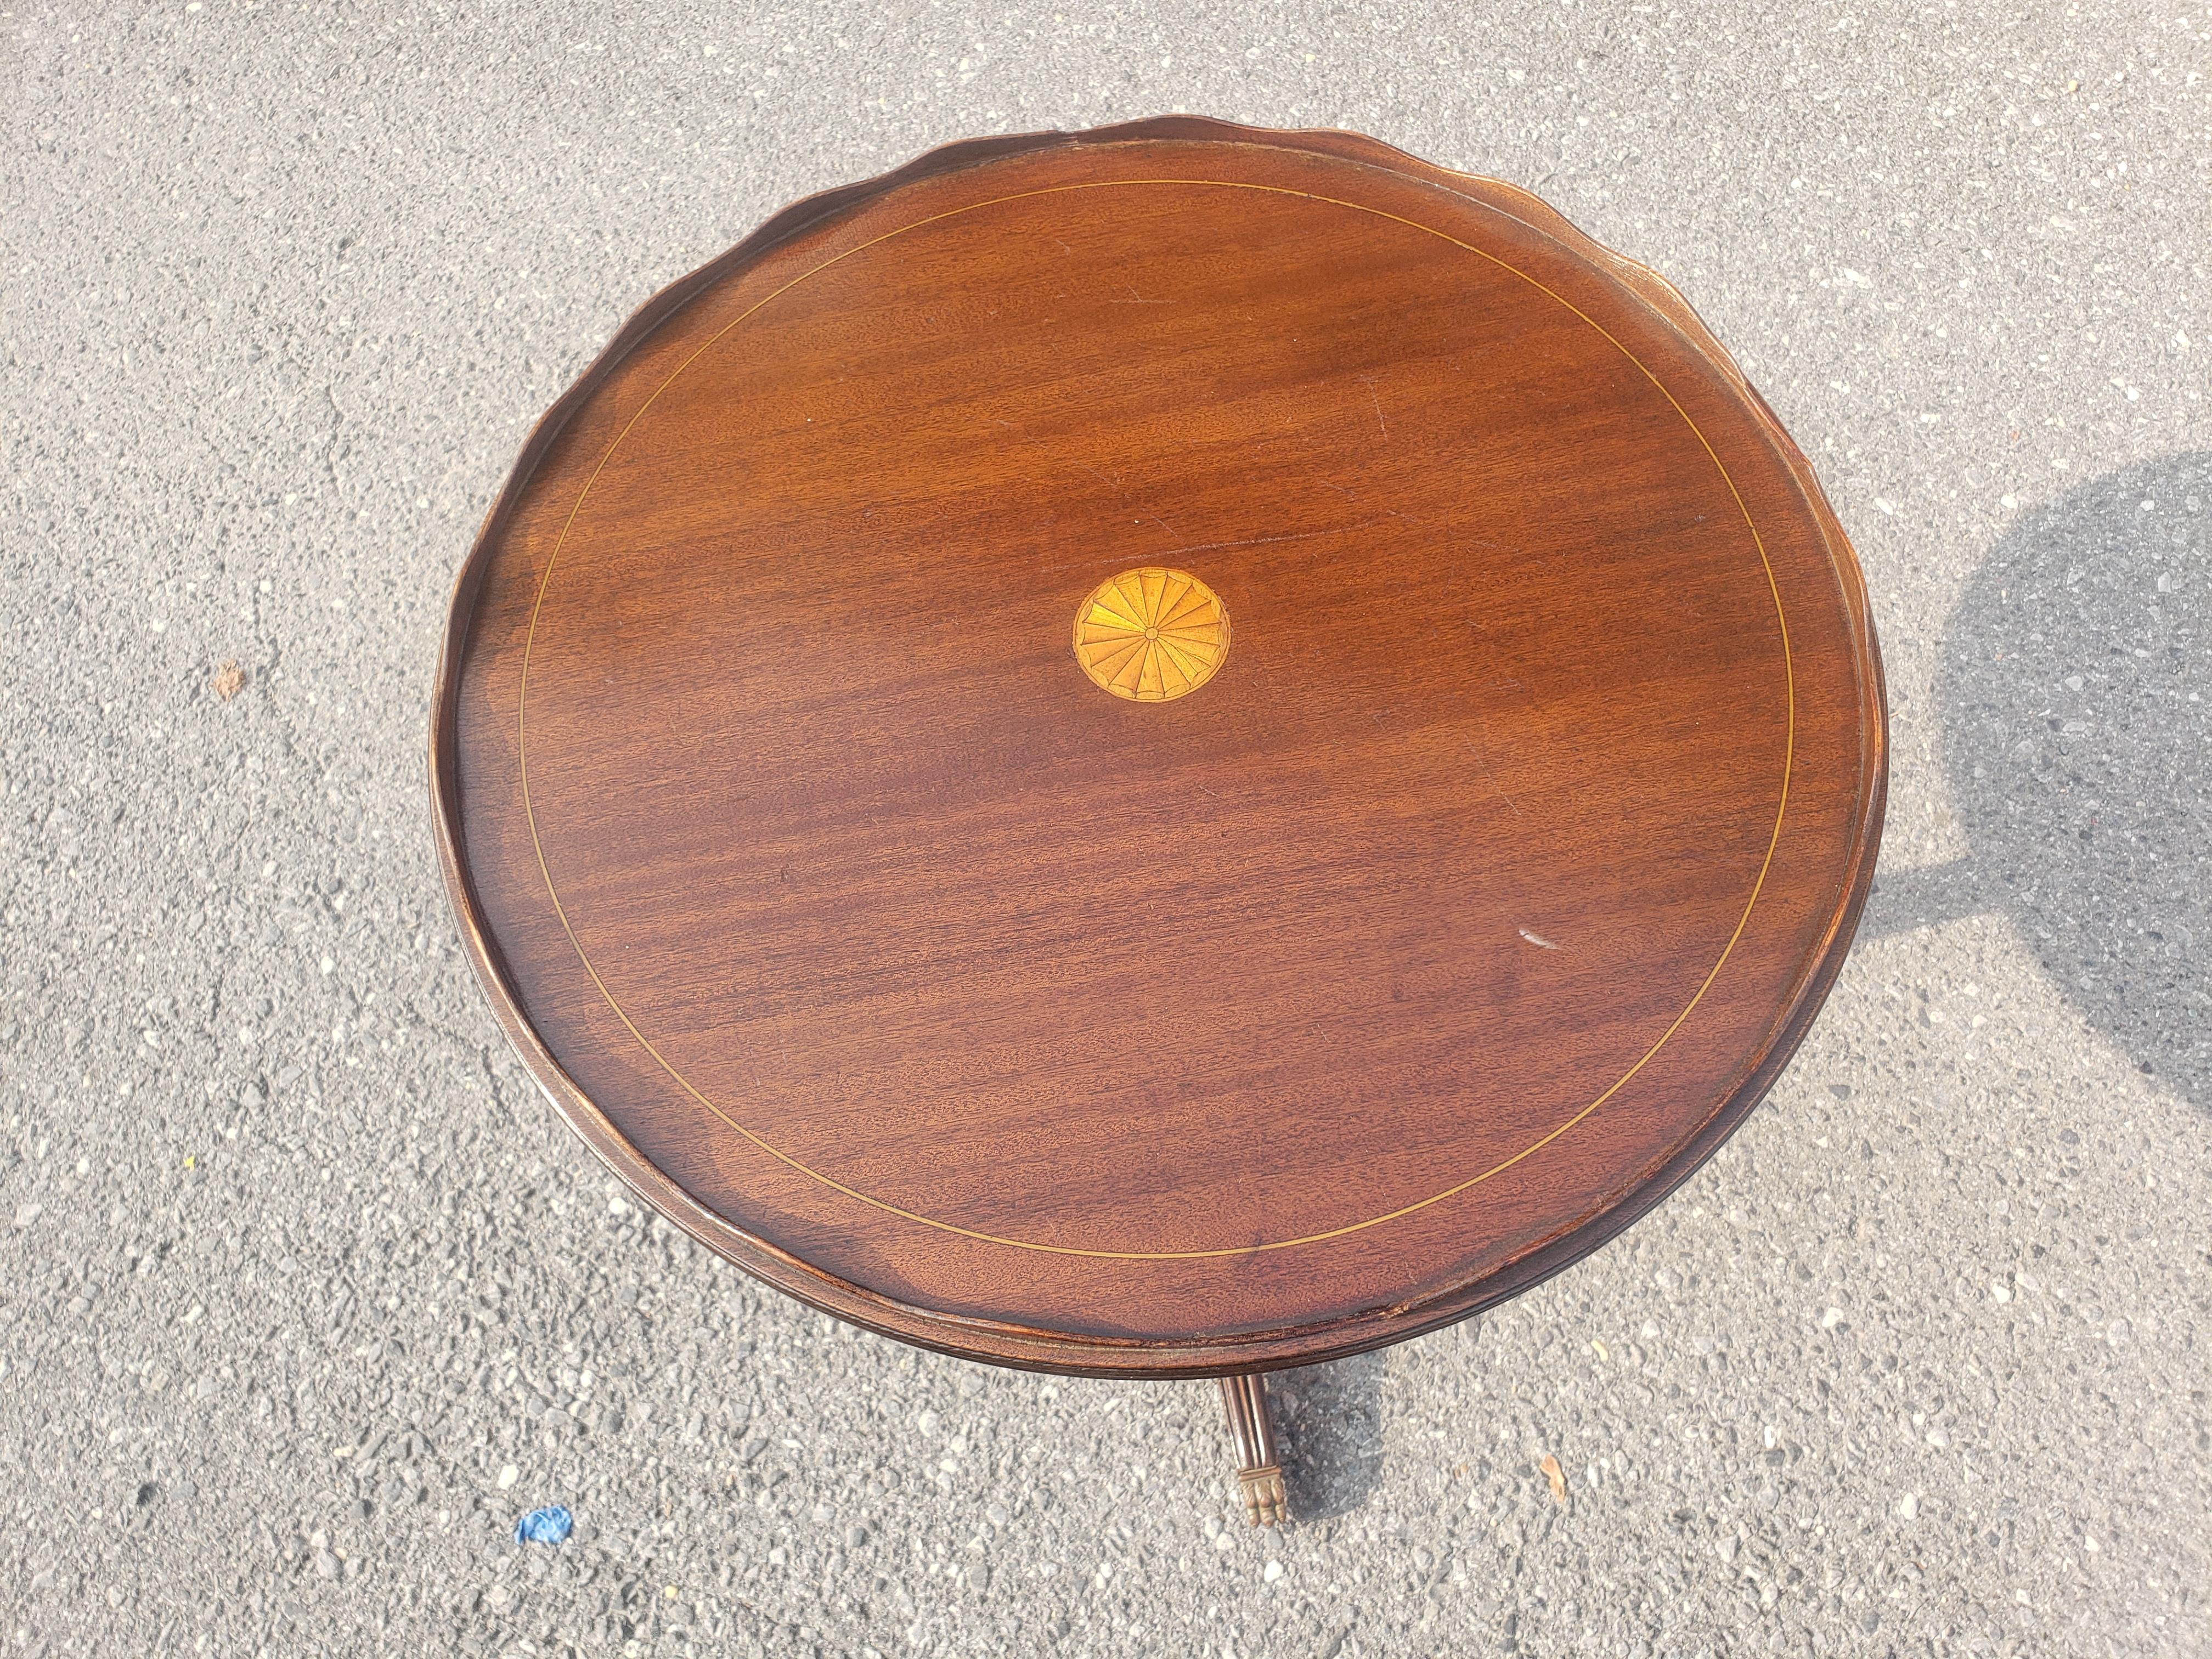 Ferguson Mahogany Inlaid Pedestal Galleried Side Table w Brass feet, Circa 1910s In Good Condition For Sale In Germantown, MD